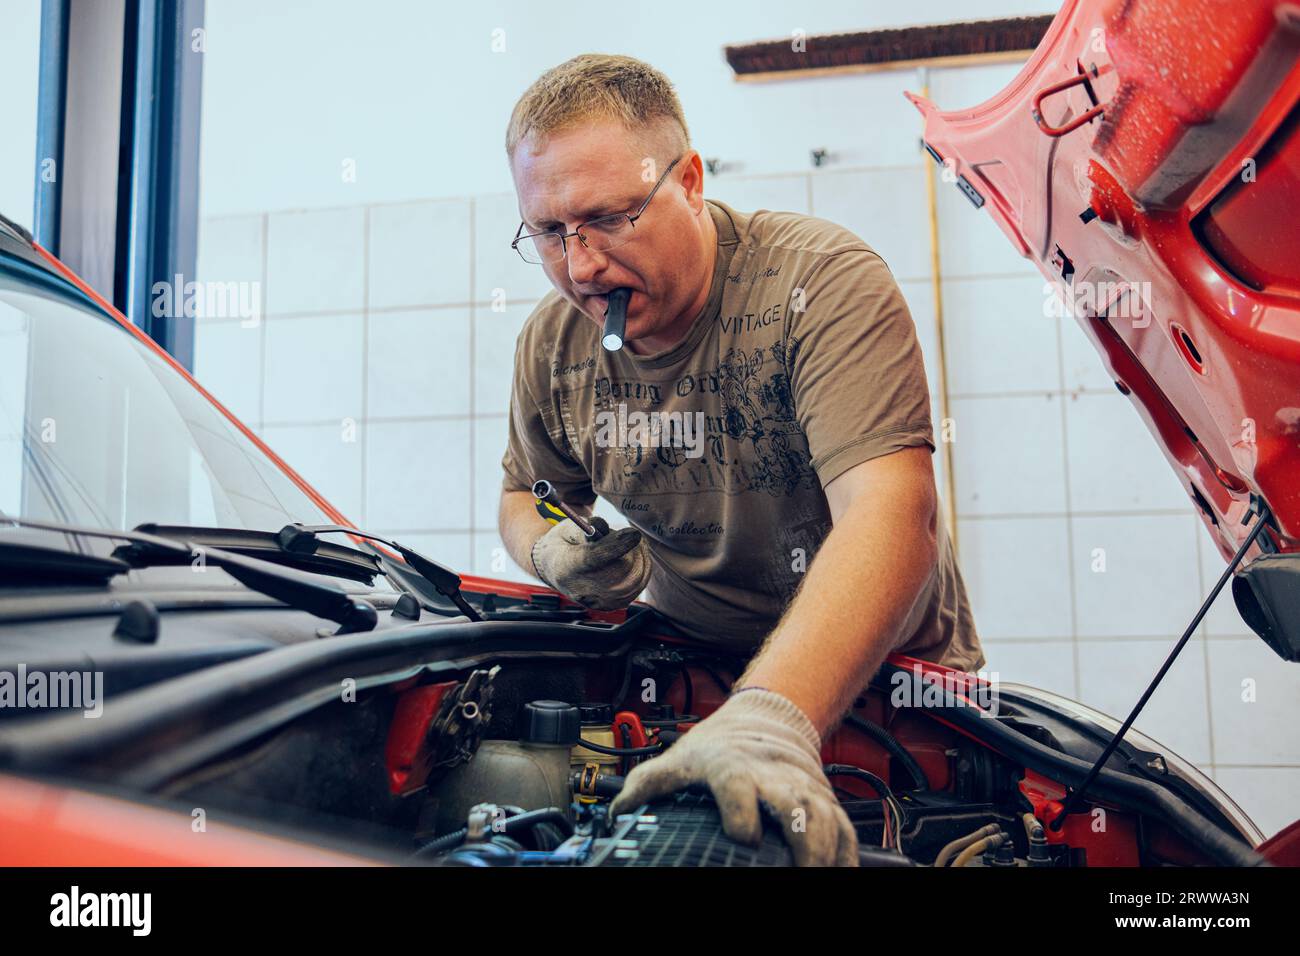 A Man with glasses Maintains a Car in a Garage. Car Repair by an experienced Specialist in a Car Repair Shop. Replacing the oil and filter in the car. Stock Photo